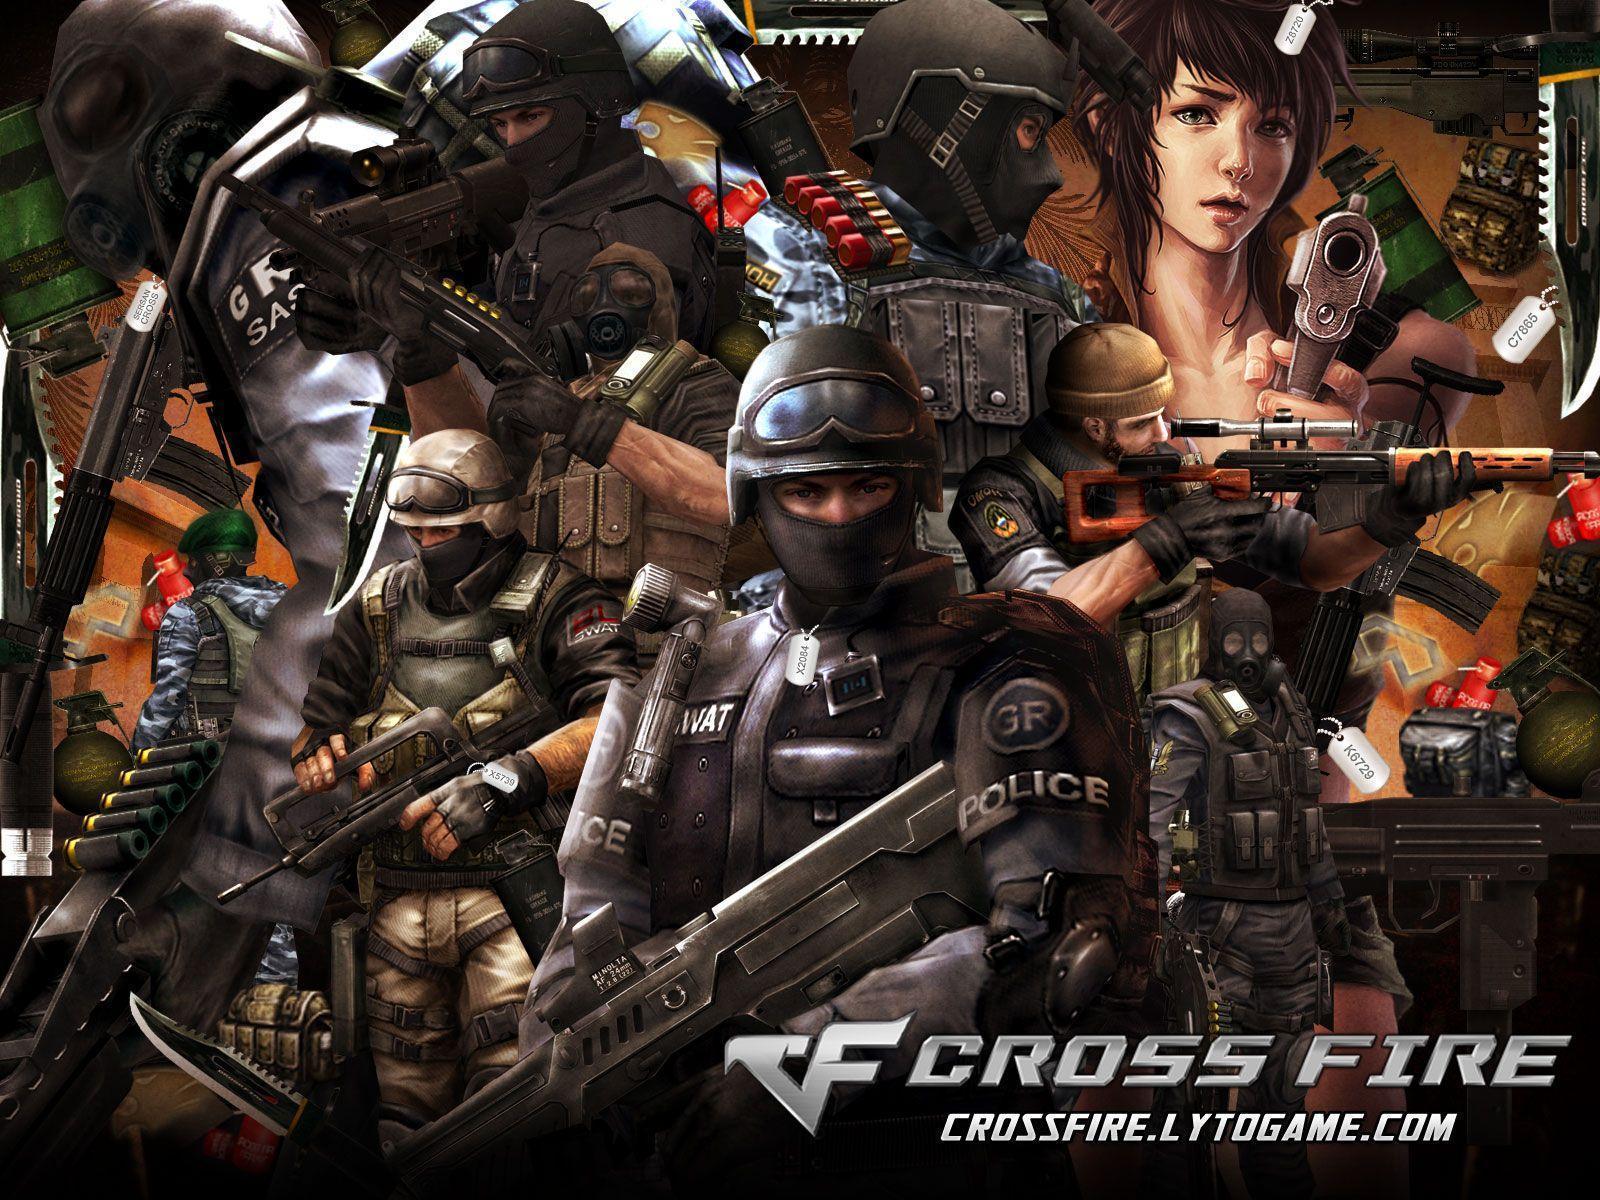 Gallery For > Crossfire Wallpaper